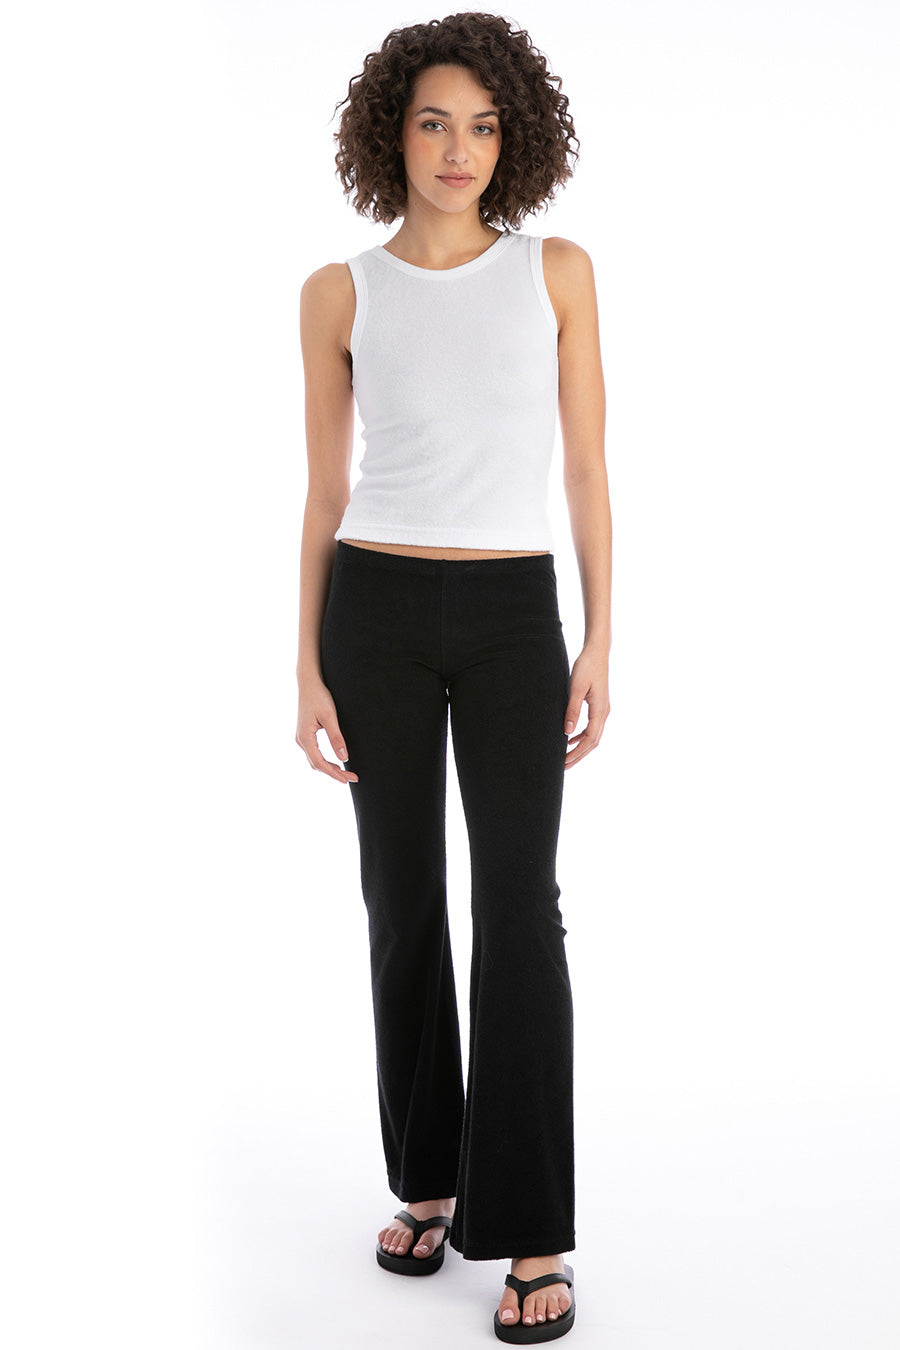 Hard Tail Forever Terry Low Rise Flare Pants - Black - S